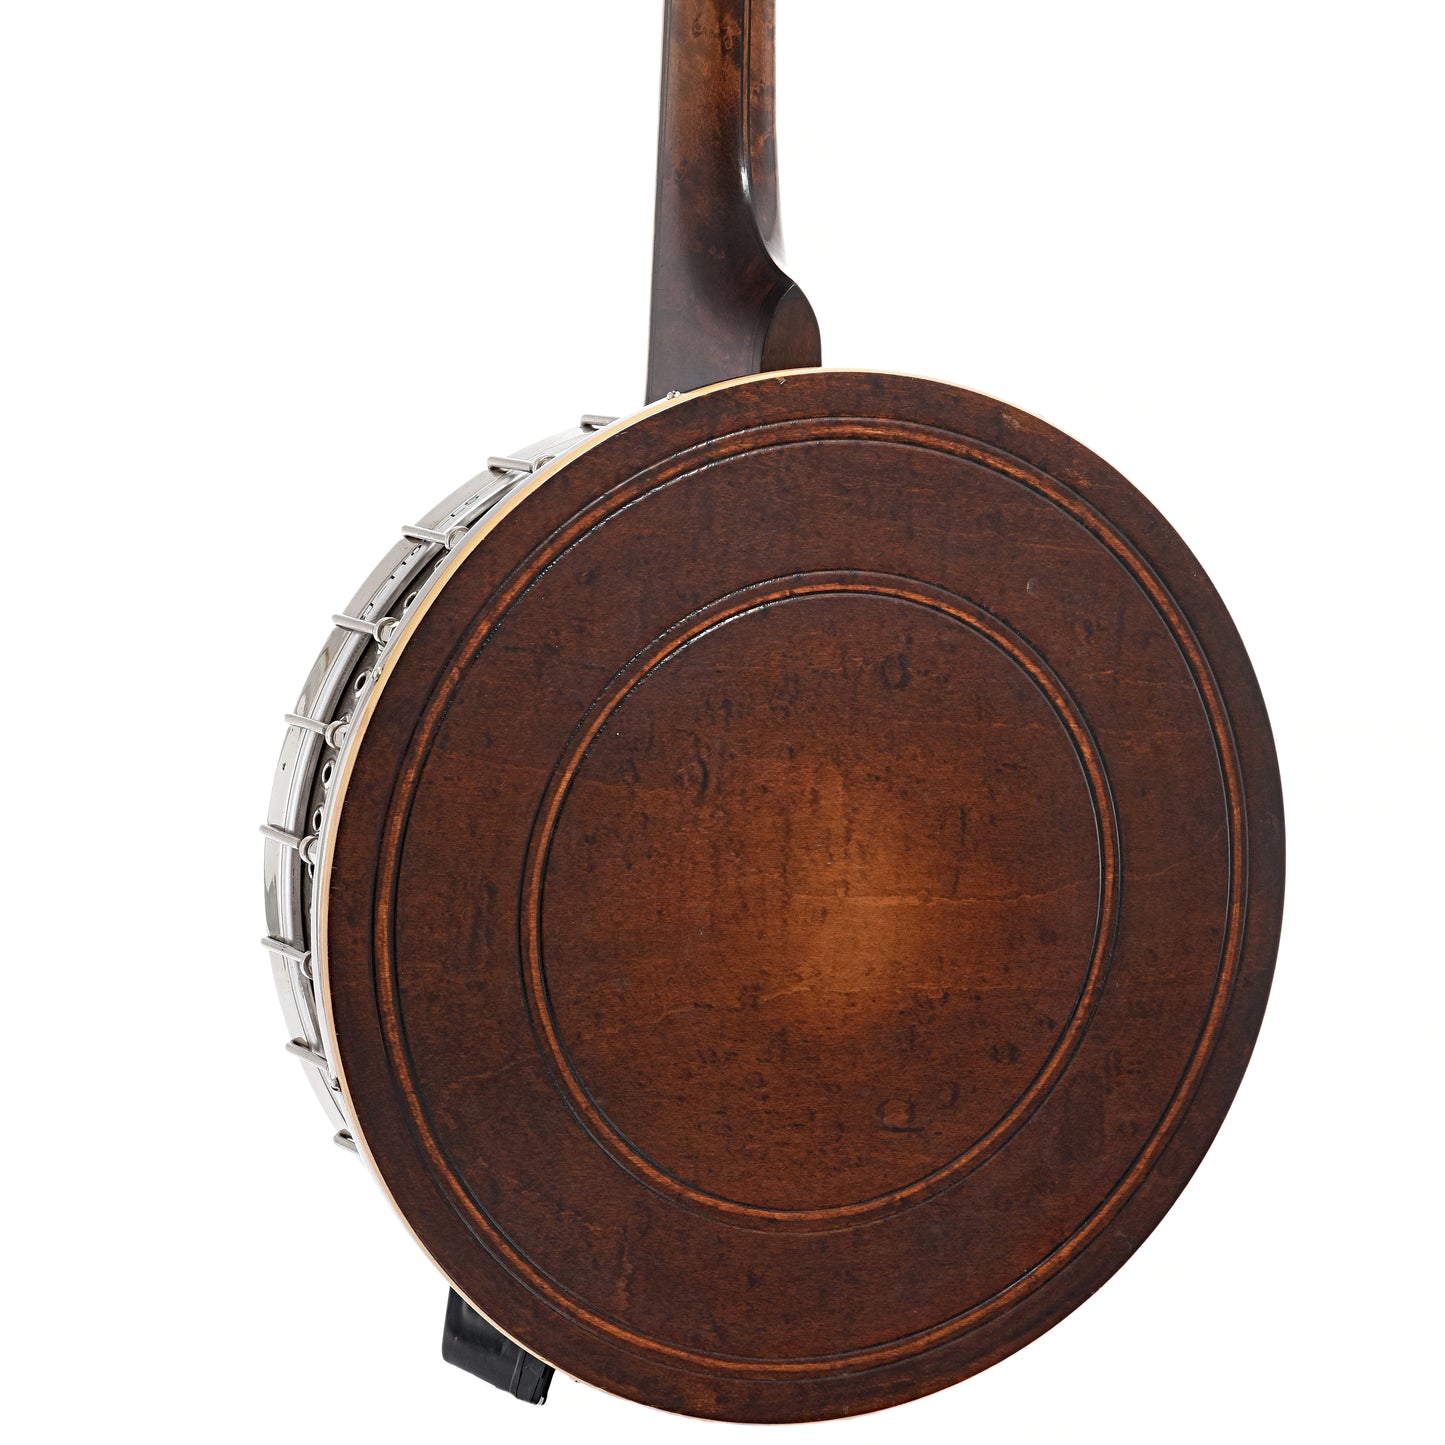 Bck and side of Bacon & Day Silver Bell No.1 Tenor Banjo (c.1923)